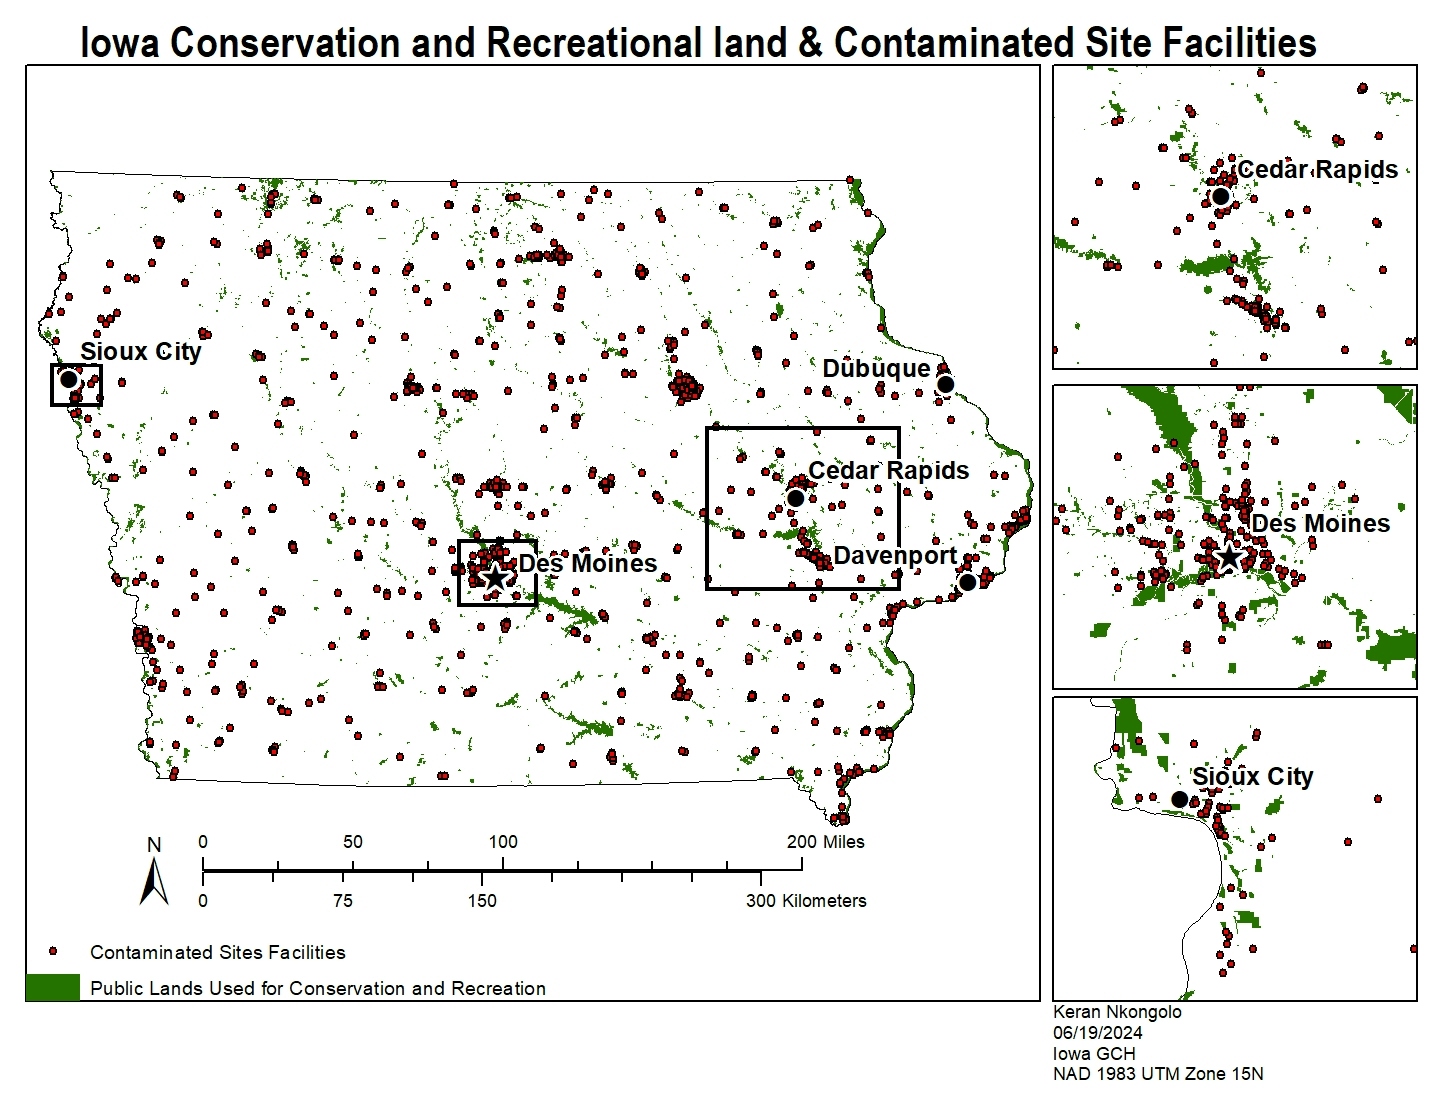 Iowa Conservation and Recreation